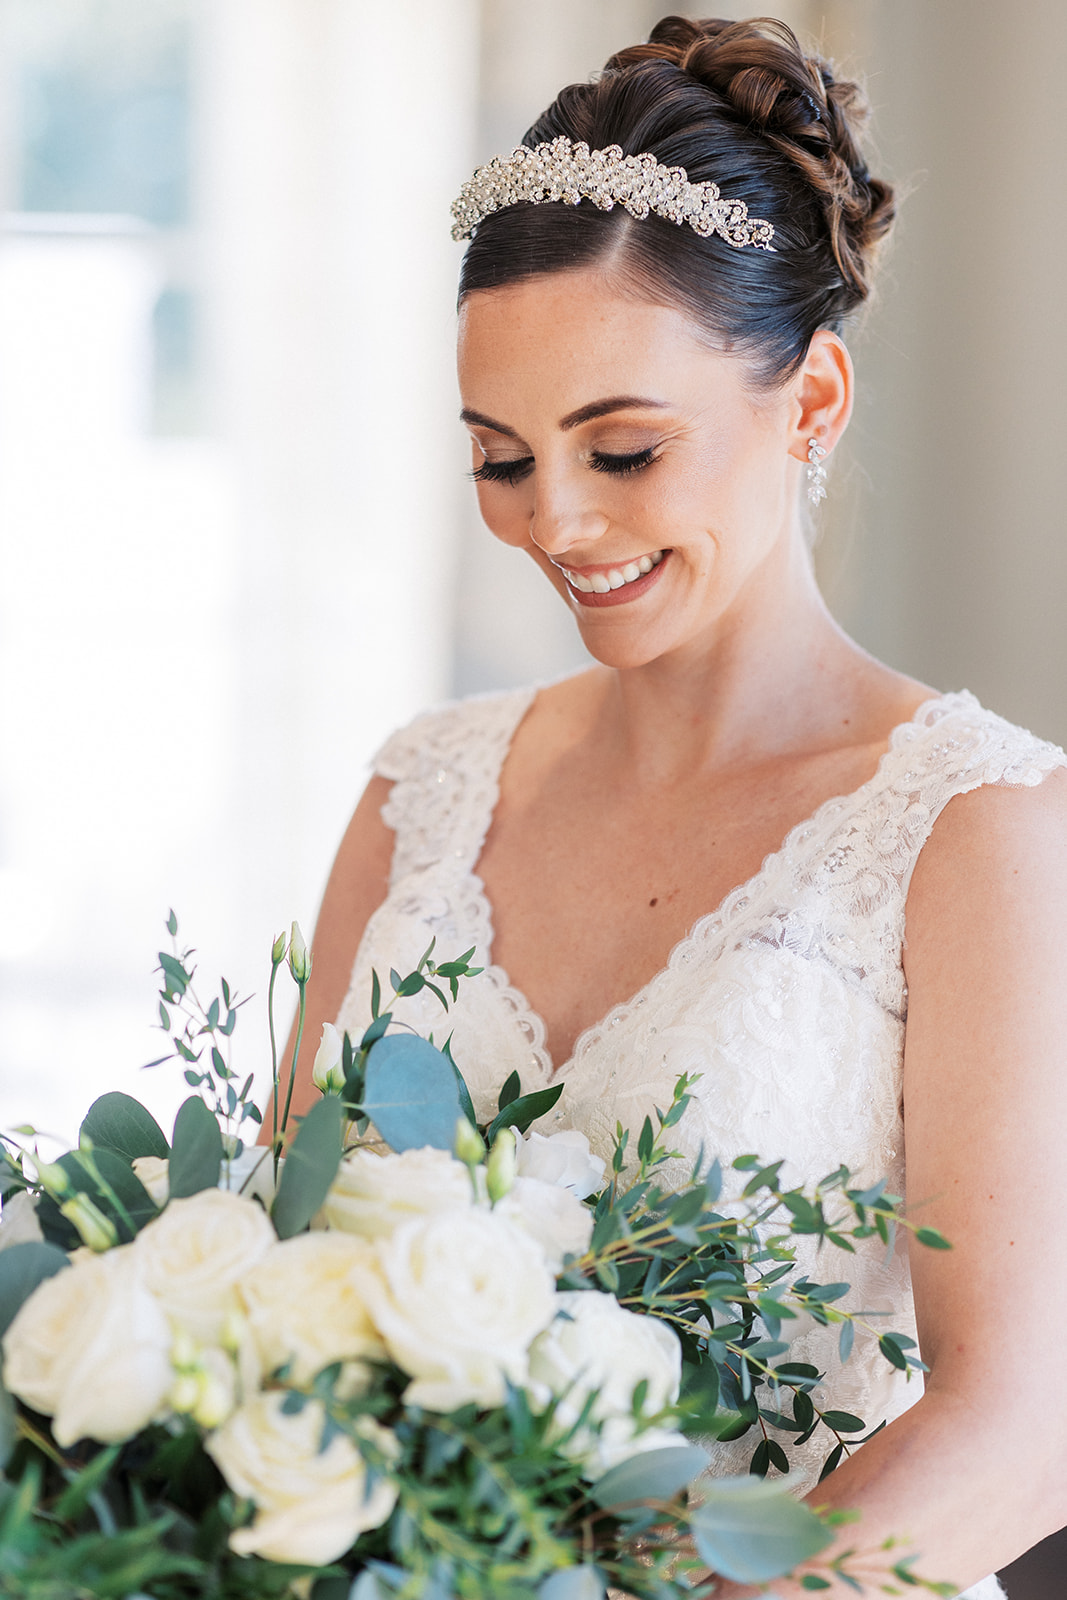 A bride smiles down at her white rose bouquet while standing in a lace dress at a Hilton Short Hills Wedding